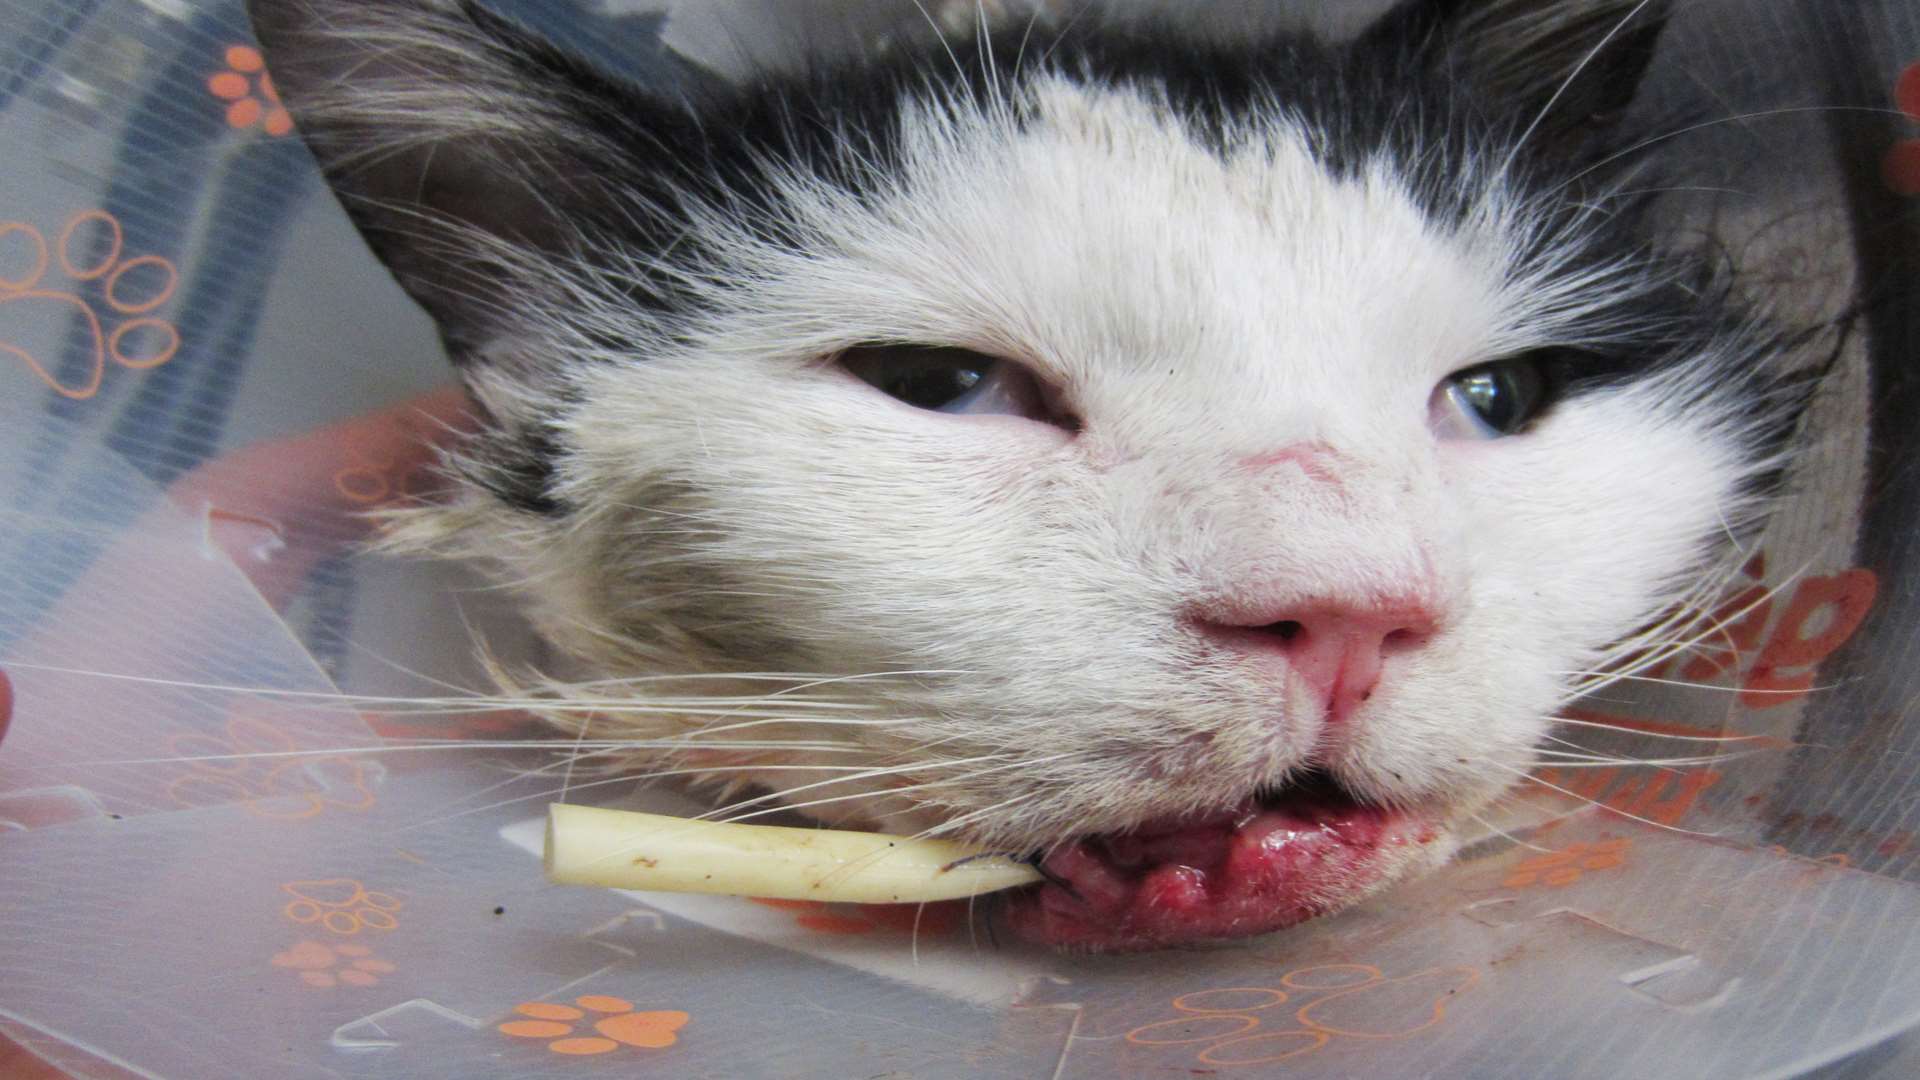 Oliver the badly injured cat after surgery